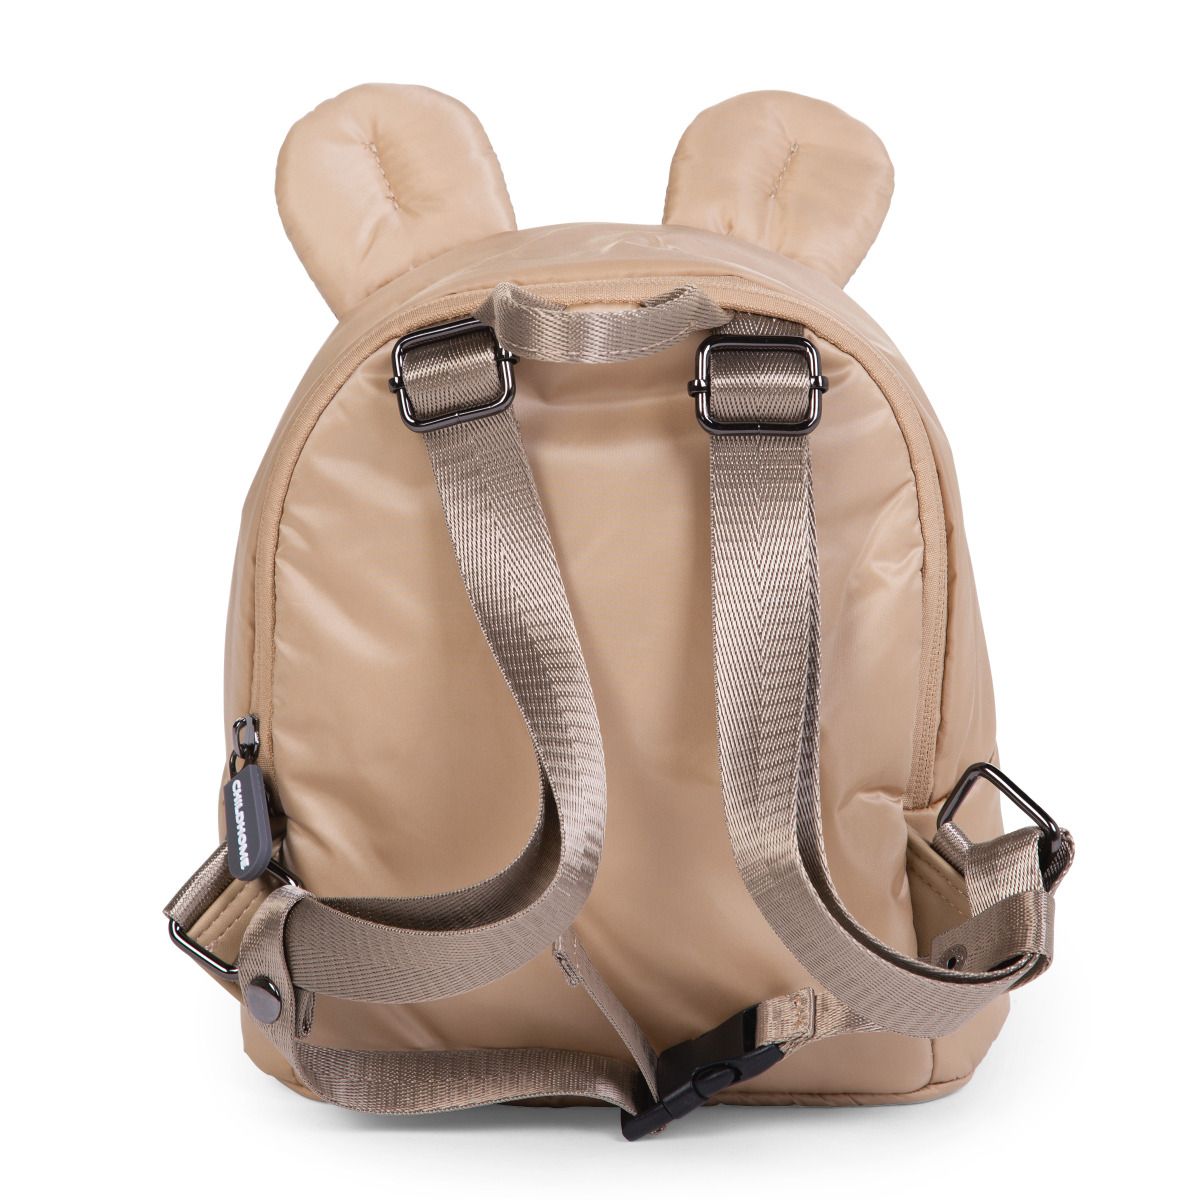 My first bag children's backpack - Puffered Beige